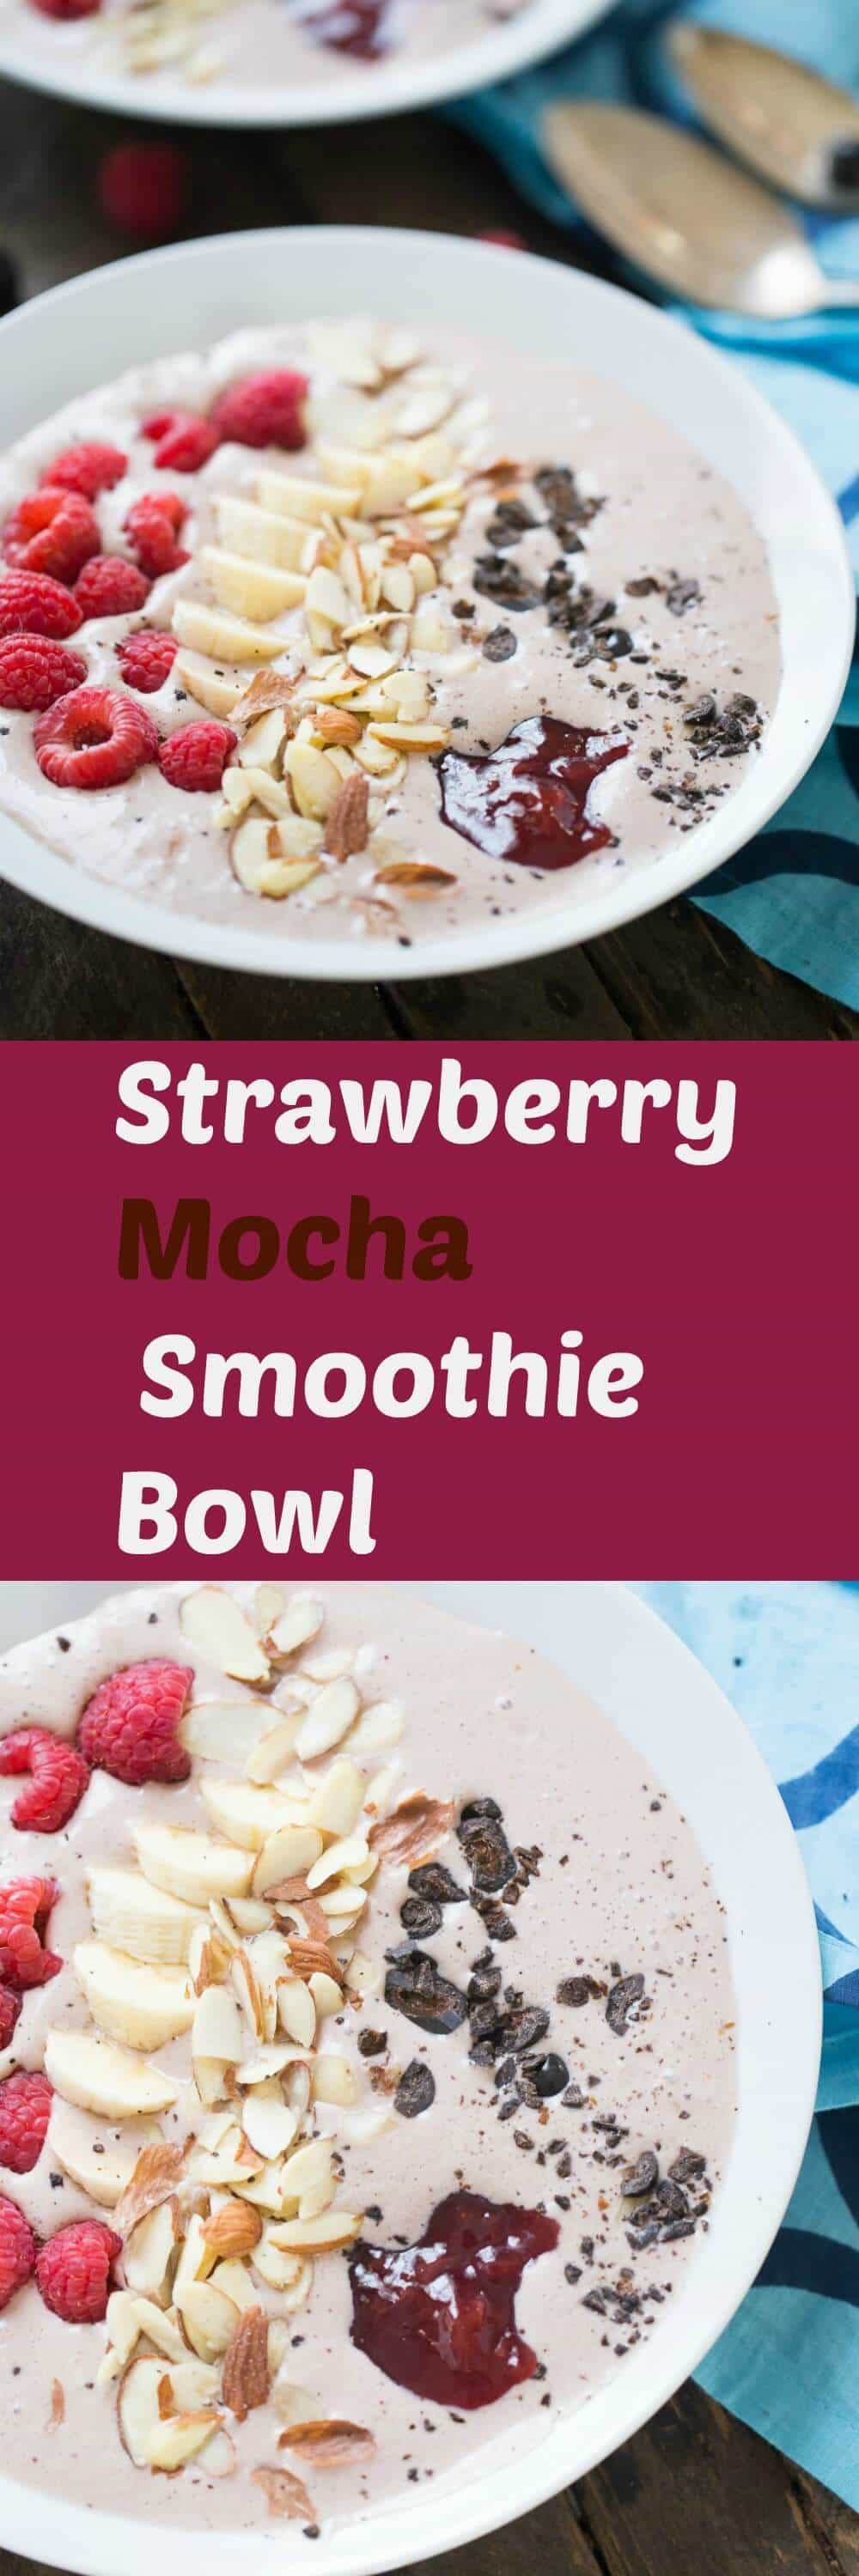 Smoothies are a great way to start the day but have you tried a smoothie bowl? This is a fun way to get a dose of healthy in the morning! This smoothie bowl has fresh fruit, nuts and a hint of mocha! lemonsforlulu.com